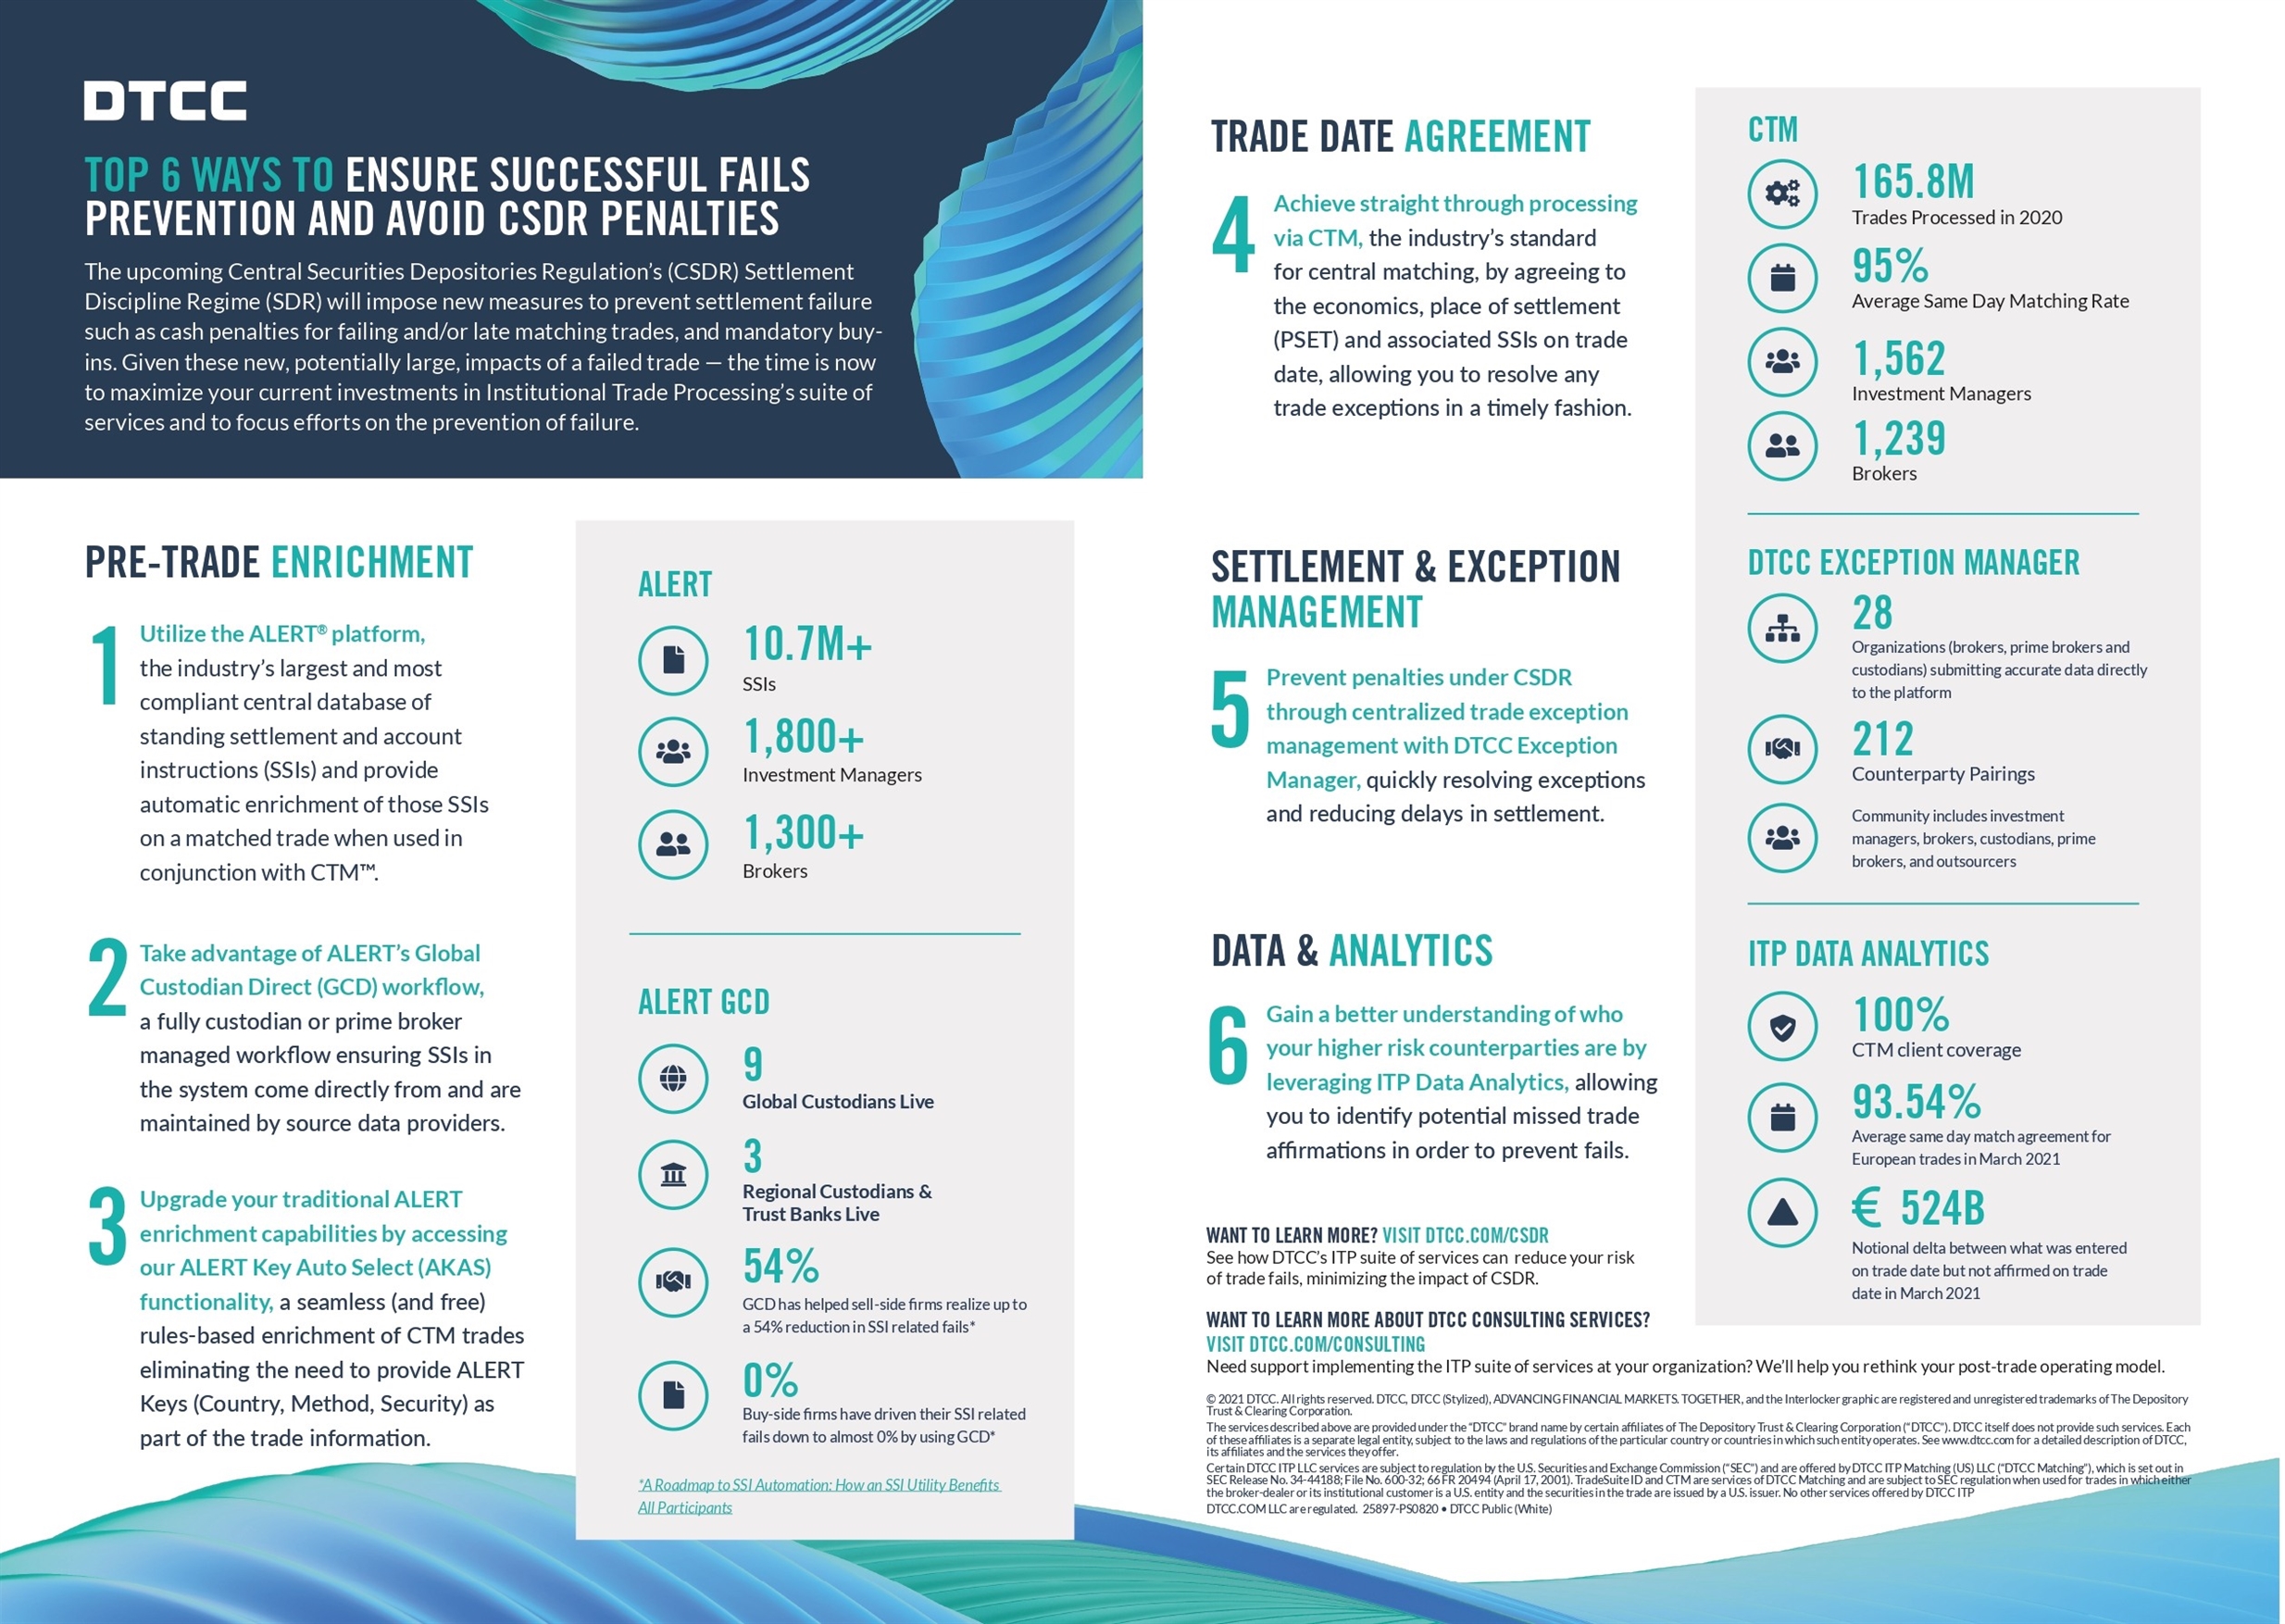 Top 6 ways to ensure successful fails prevention and avoid CSDR penalties by DTCC - Infographic